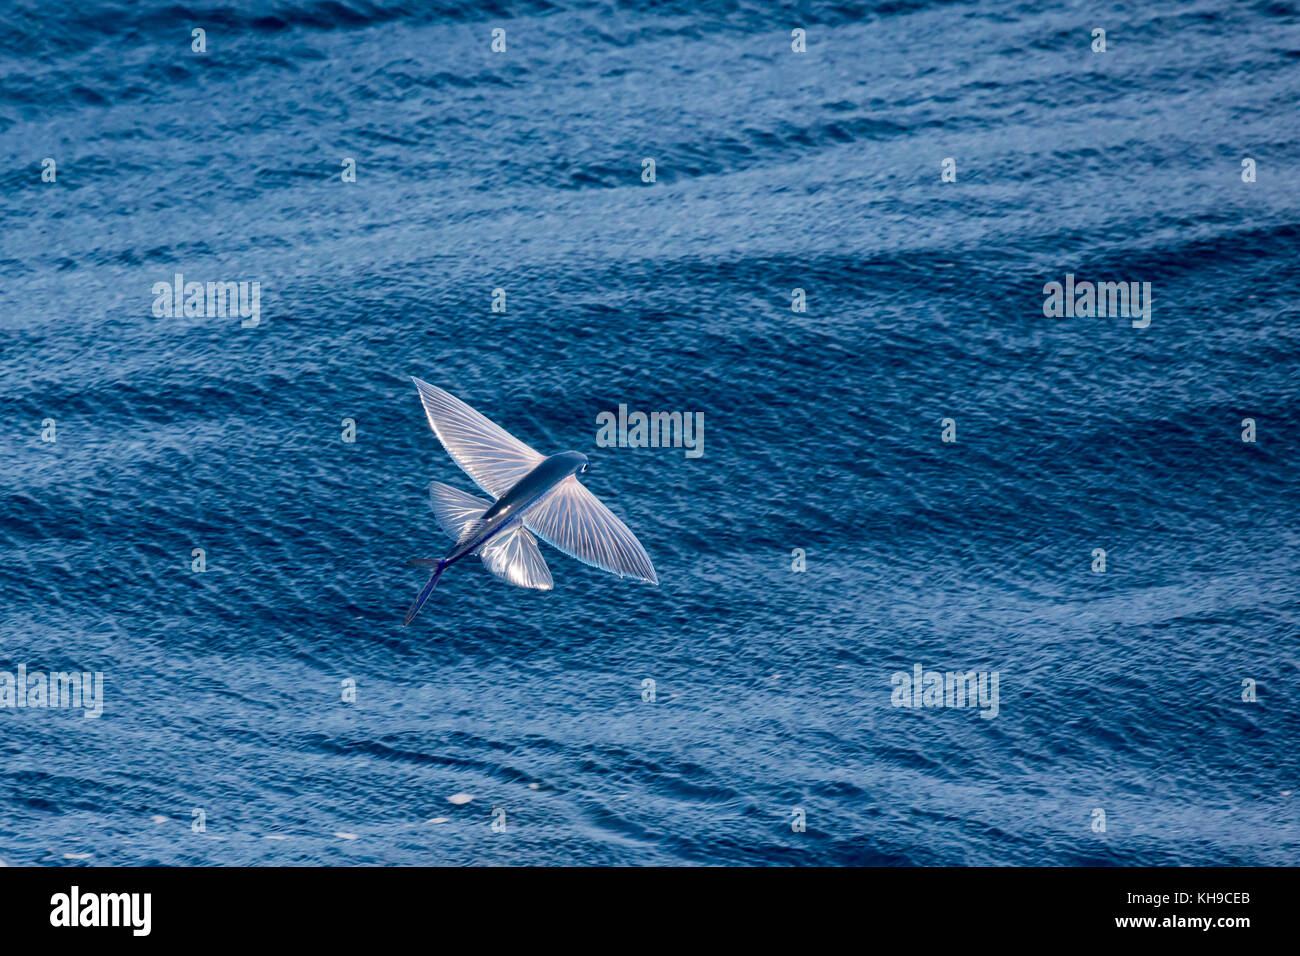 A flying fish with fins spread wide gliding above the surface of the water off the coast of Brazil Stock Photo